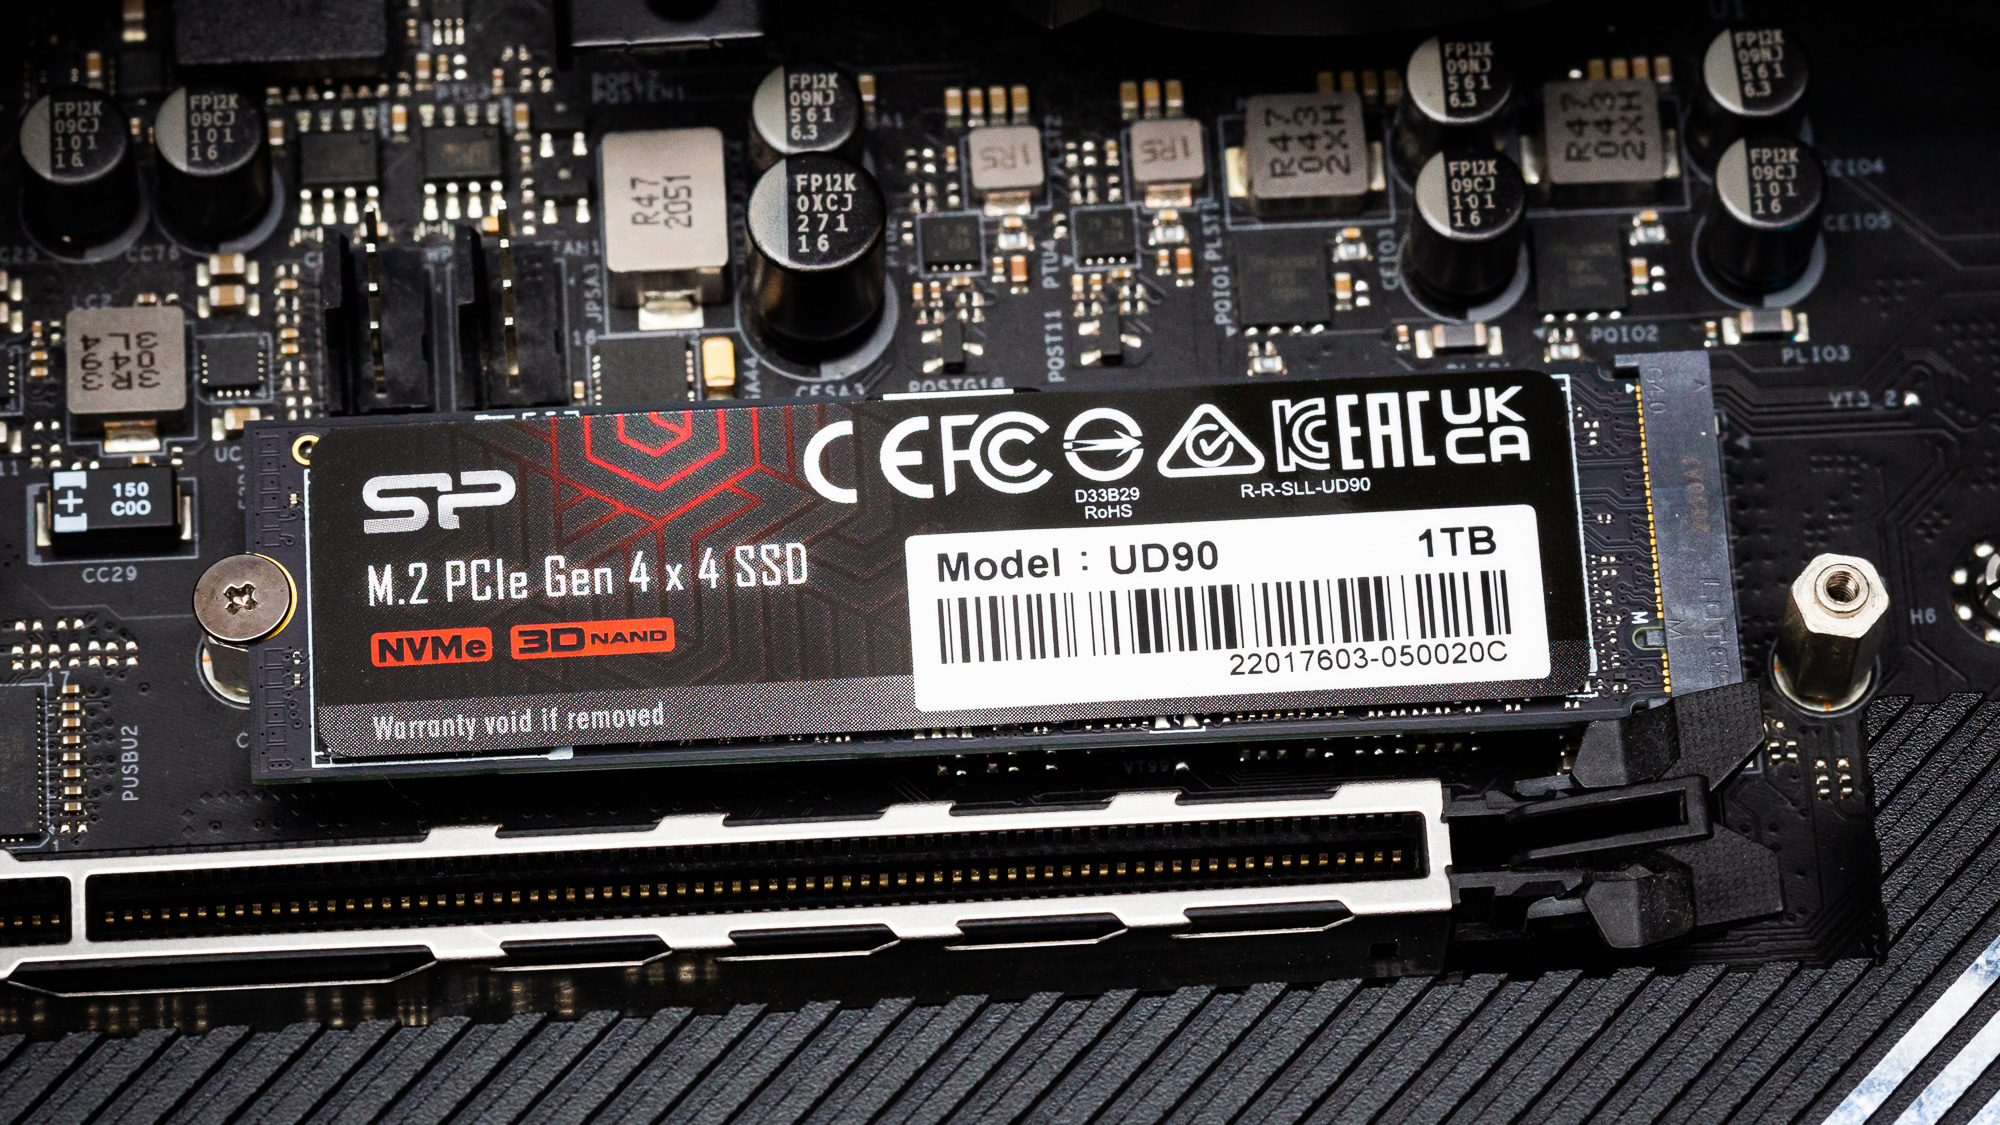 2TB Silicon Power UD90 2230 SSD Review: Power to the Portables